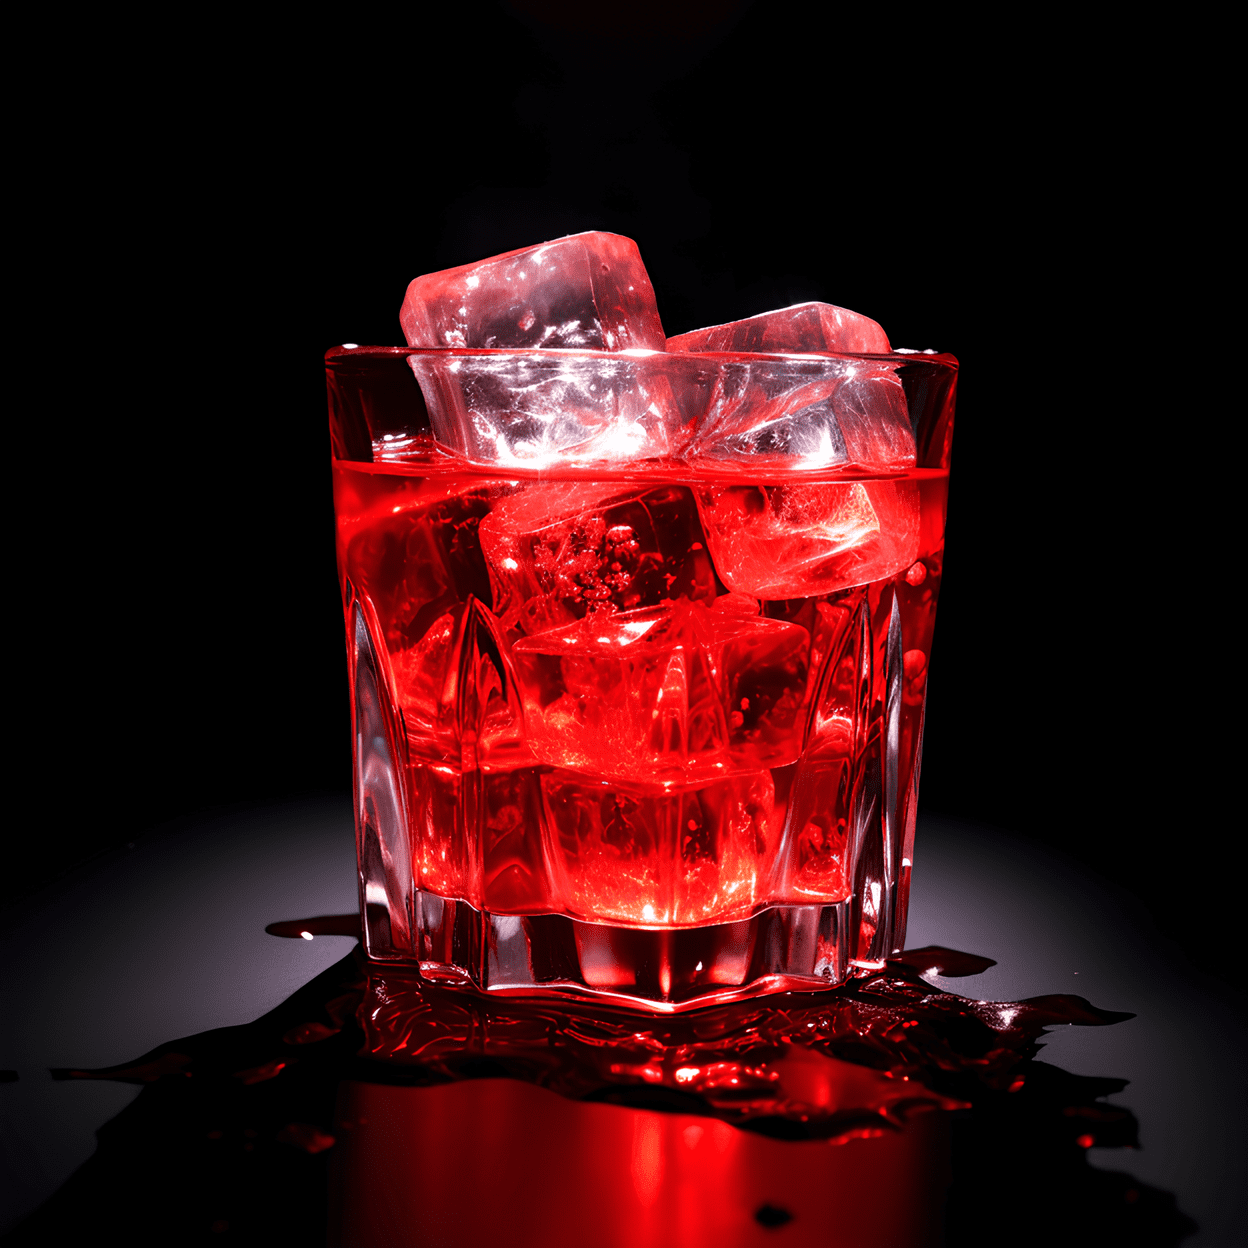 Atomic Fireball Cocktail Recipe - The Atomic Fireball is a spicy, sweet, and slightly tart cocktail. The cinnamon whiskey gives it a fiery kick, while the apple cider and grenadine add a sweet and tart balance. It's a bold, full-bodied drink with a lingering heat that warms you from the inside out.